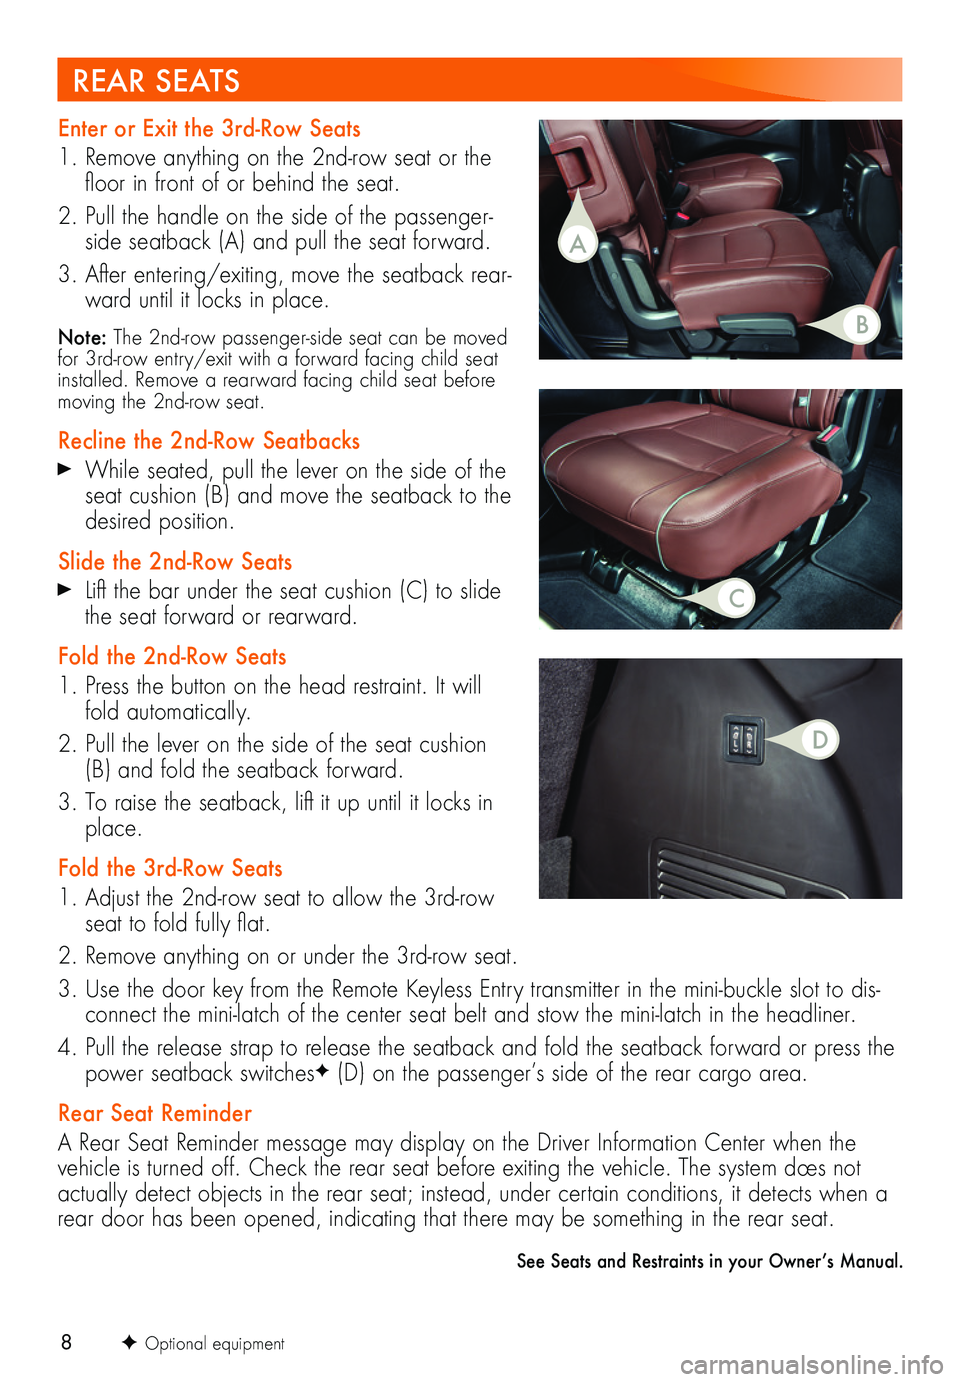 BUICK ENCLAVE 2019  Get To Know Guide 8F Optional equipment
REAR SEATS
Enter or Exit the 3rd-Row Seats
1. Remove anything on the 2nd-row seat or the floor in front of or behind the seat.
2. Pull the handle on the side of the passenger-sid